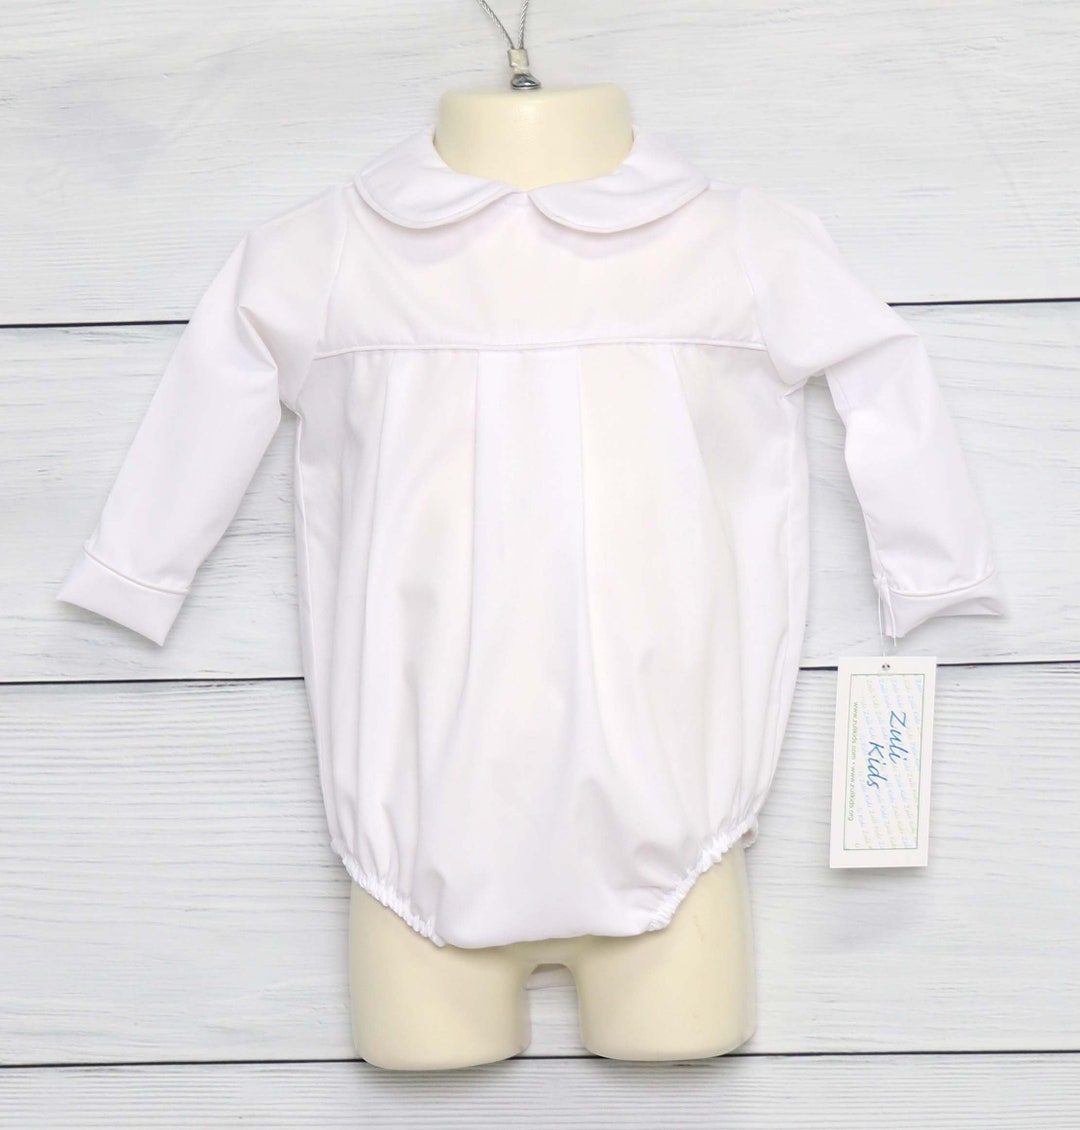 Baby Boy Baptism Outfit Boy Baptism Outfit Baptism Outfit - Etsy